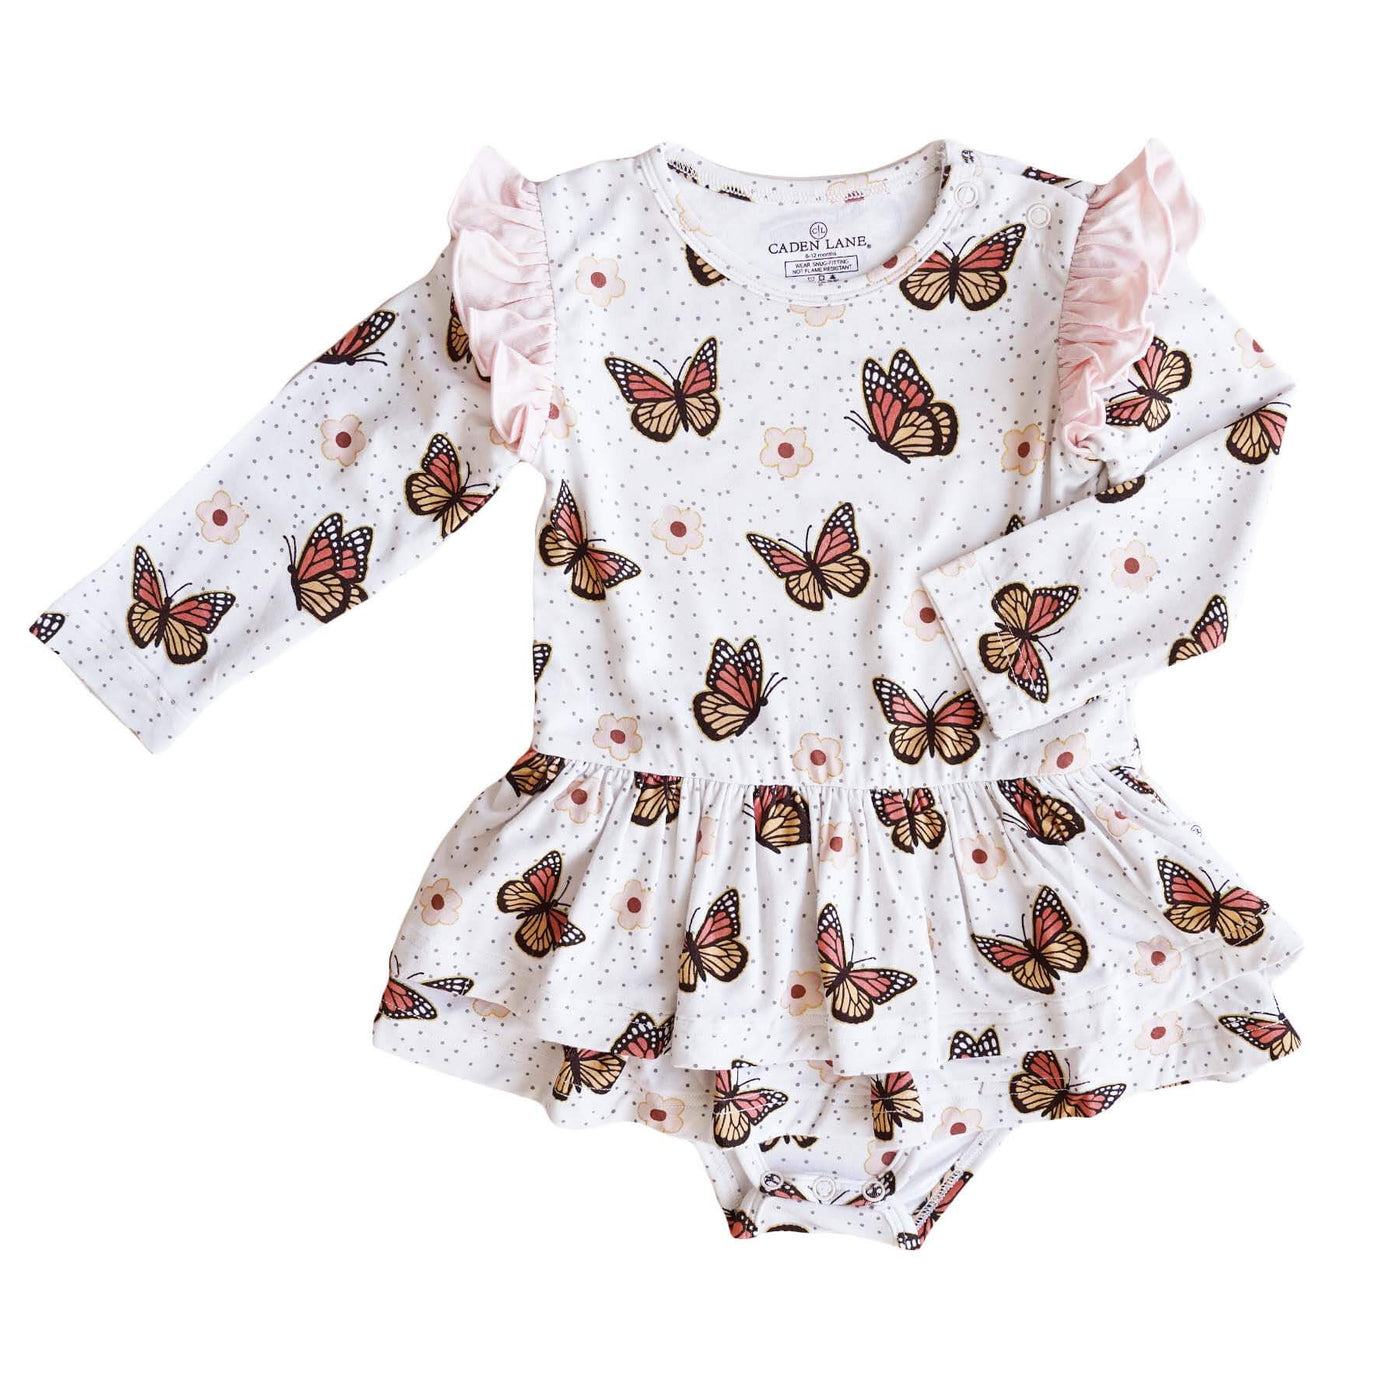 ruffle skirt bodysuit for babies with butterflies and gold foil 